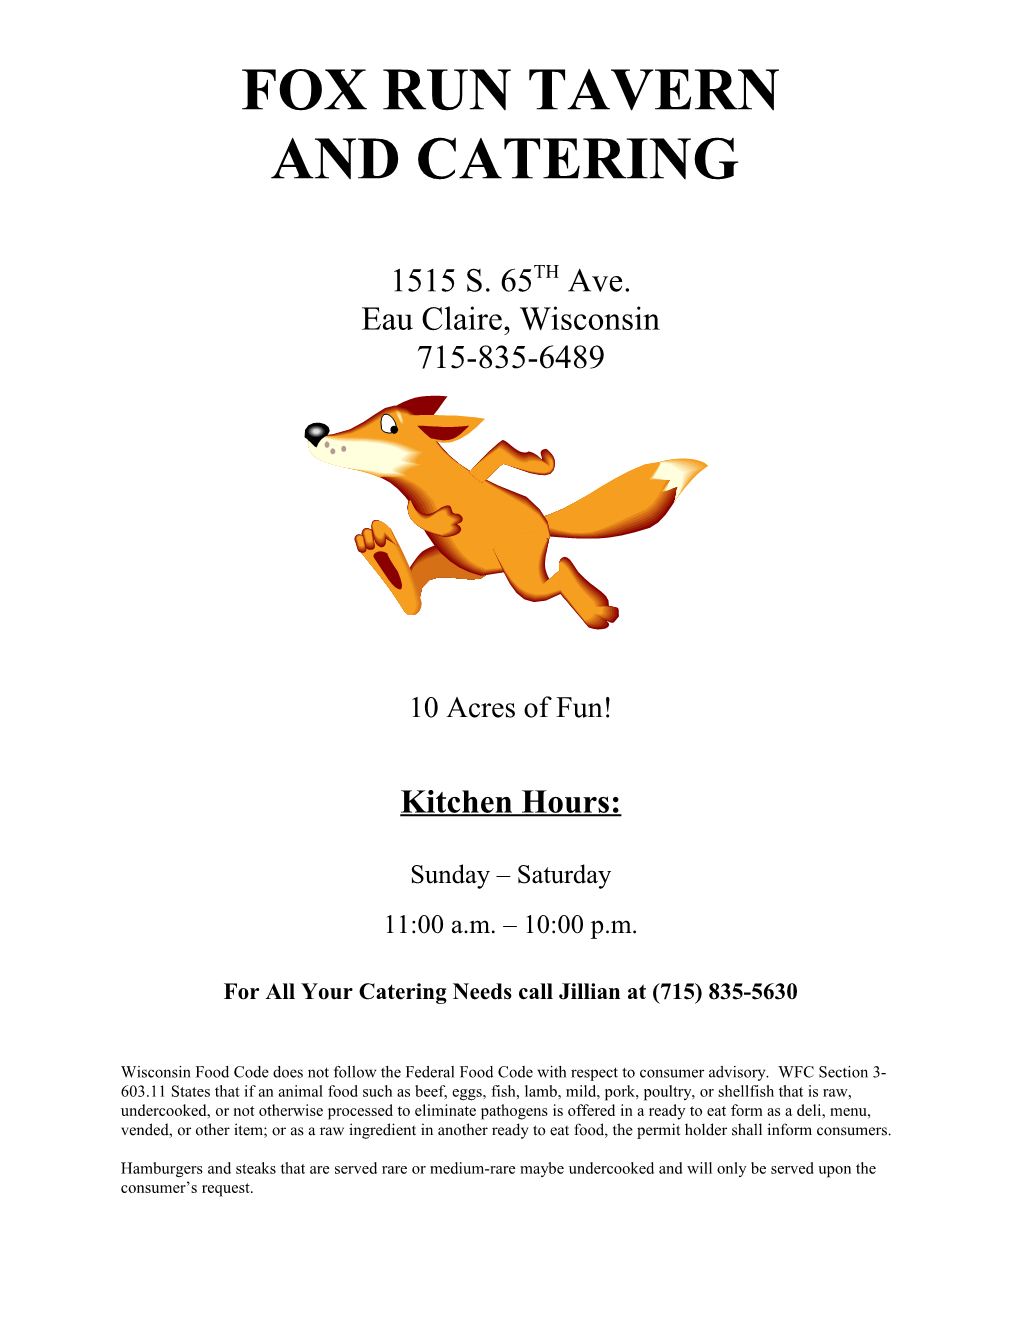 For All Your Catering Needs Call Jillian at (715)835-5630